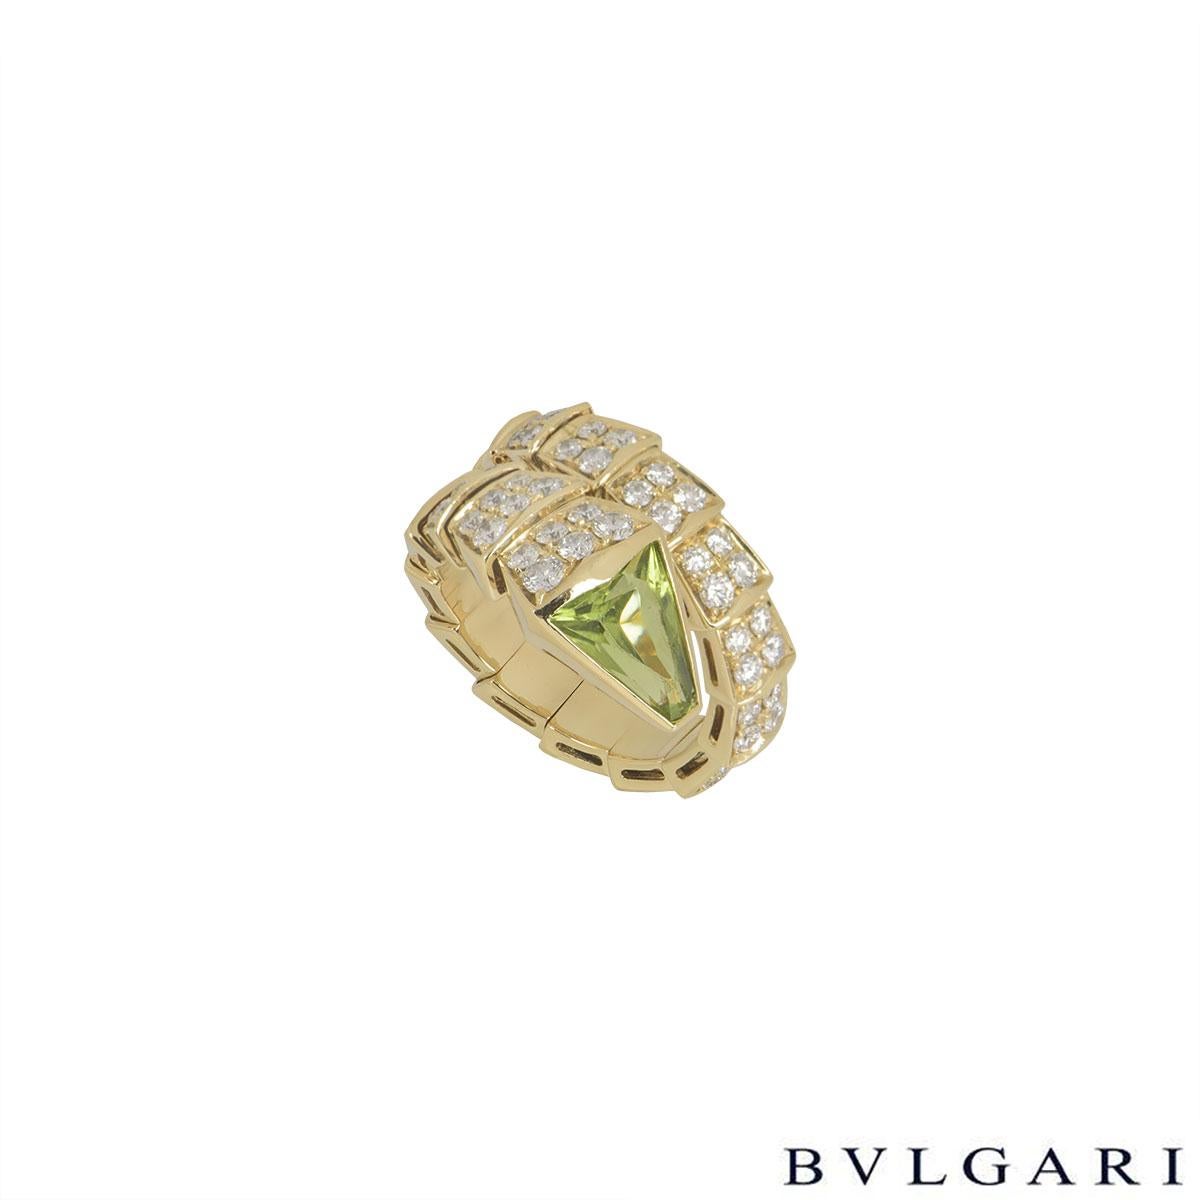 An 18k yellow gold diamond and peridot ring from the Serpenti collection by Bvlgari. The ring has 74 pave set diamonds throughout the body, totalling approximately 2.20ct, with a faceted peridot set in the head of the serpent. The ring measures